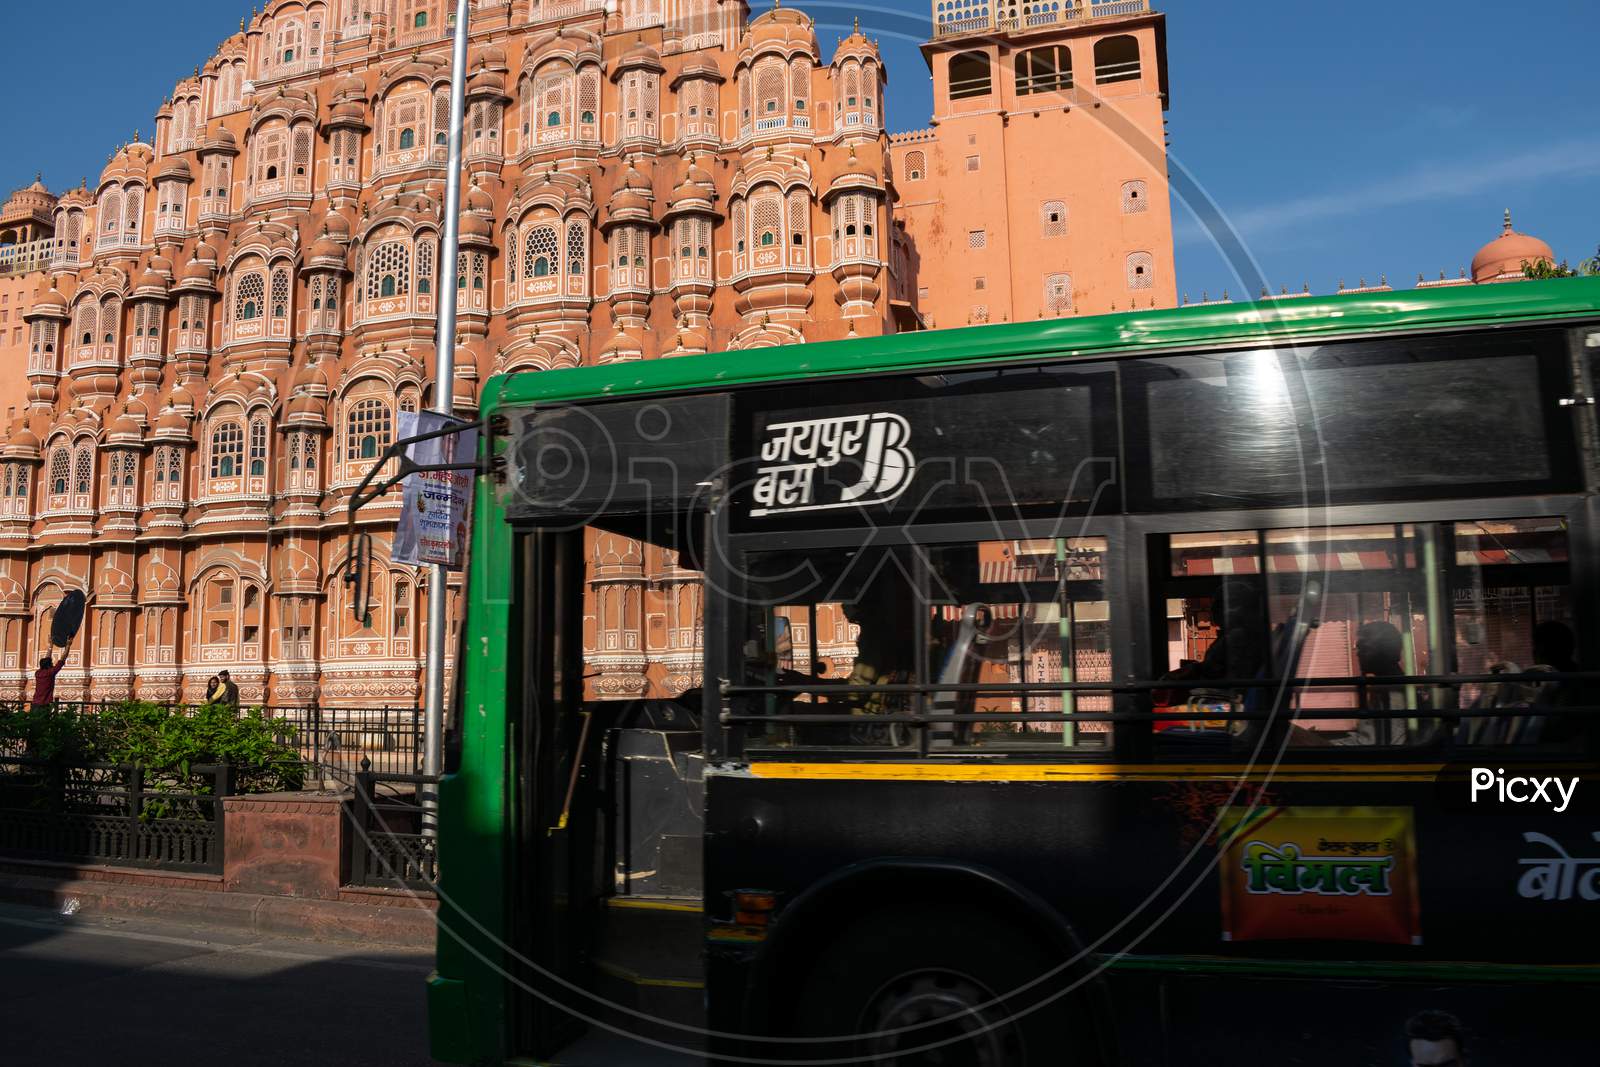 A Jaipur Bus or a low floor bus in front of Hawa Mahal, Jaipur